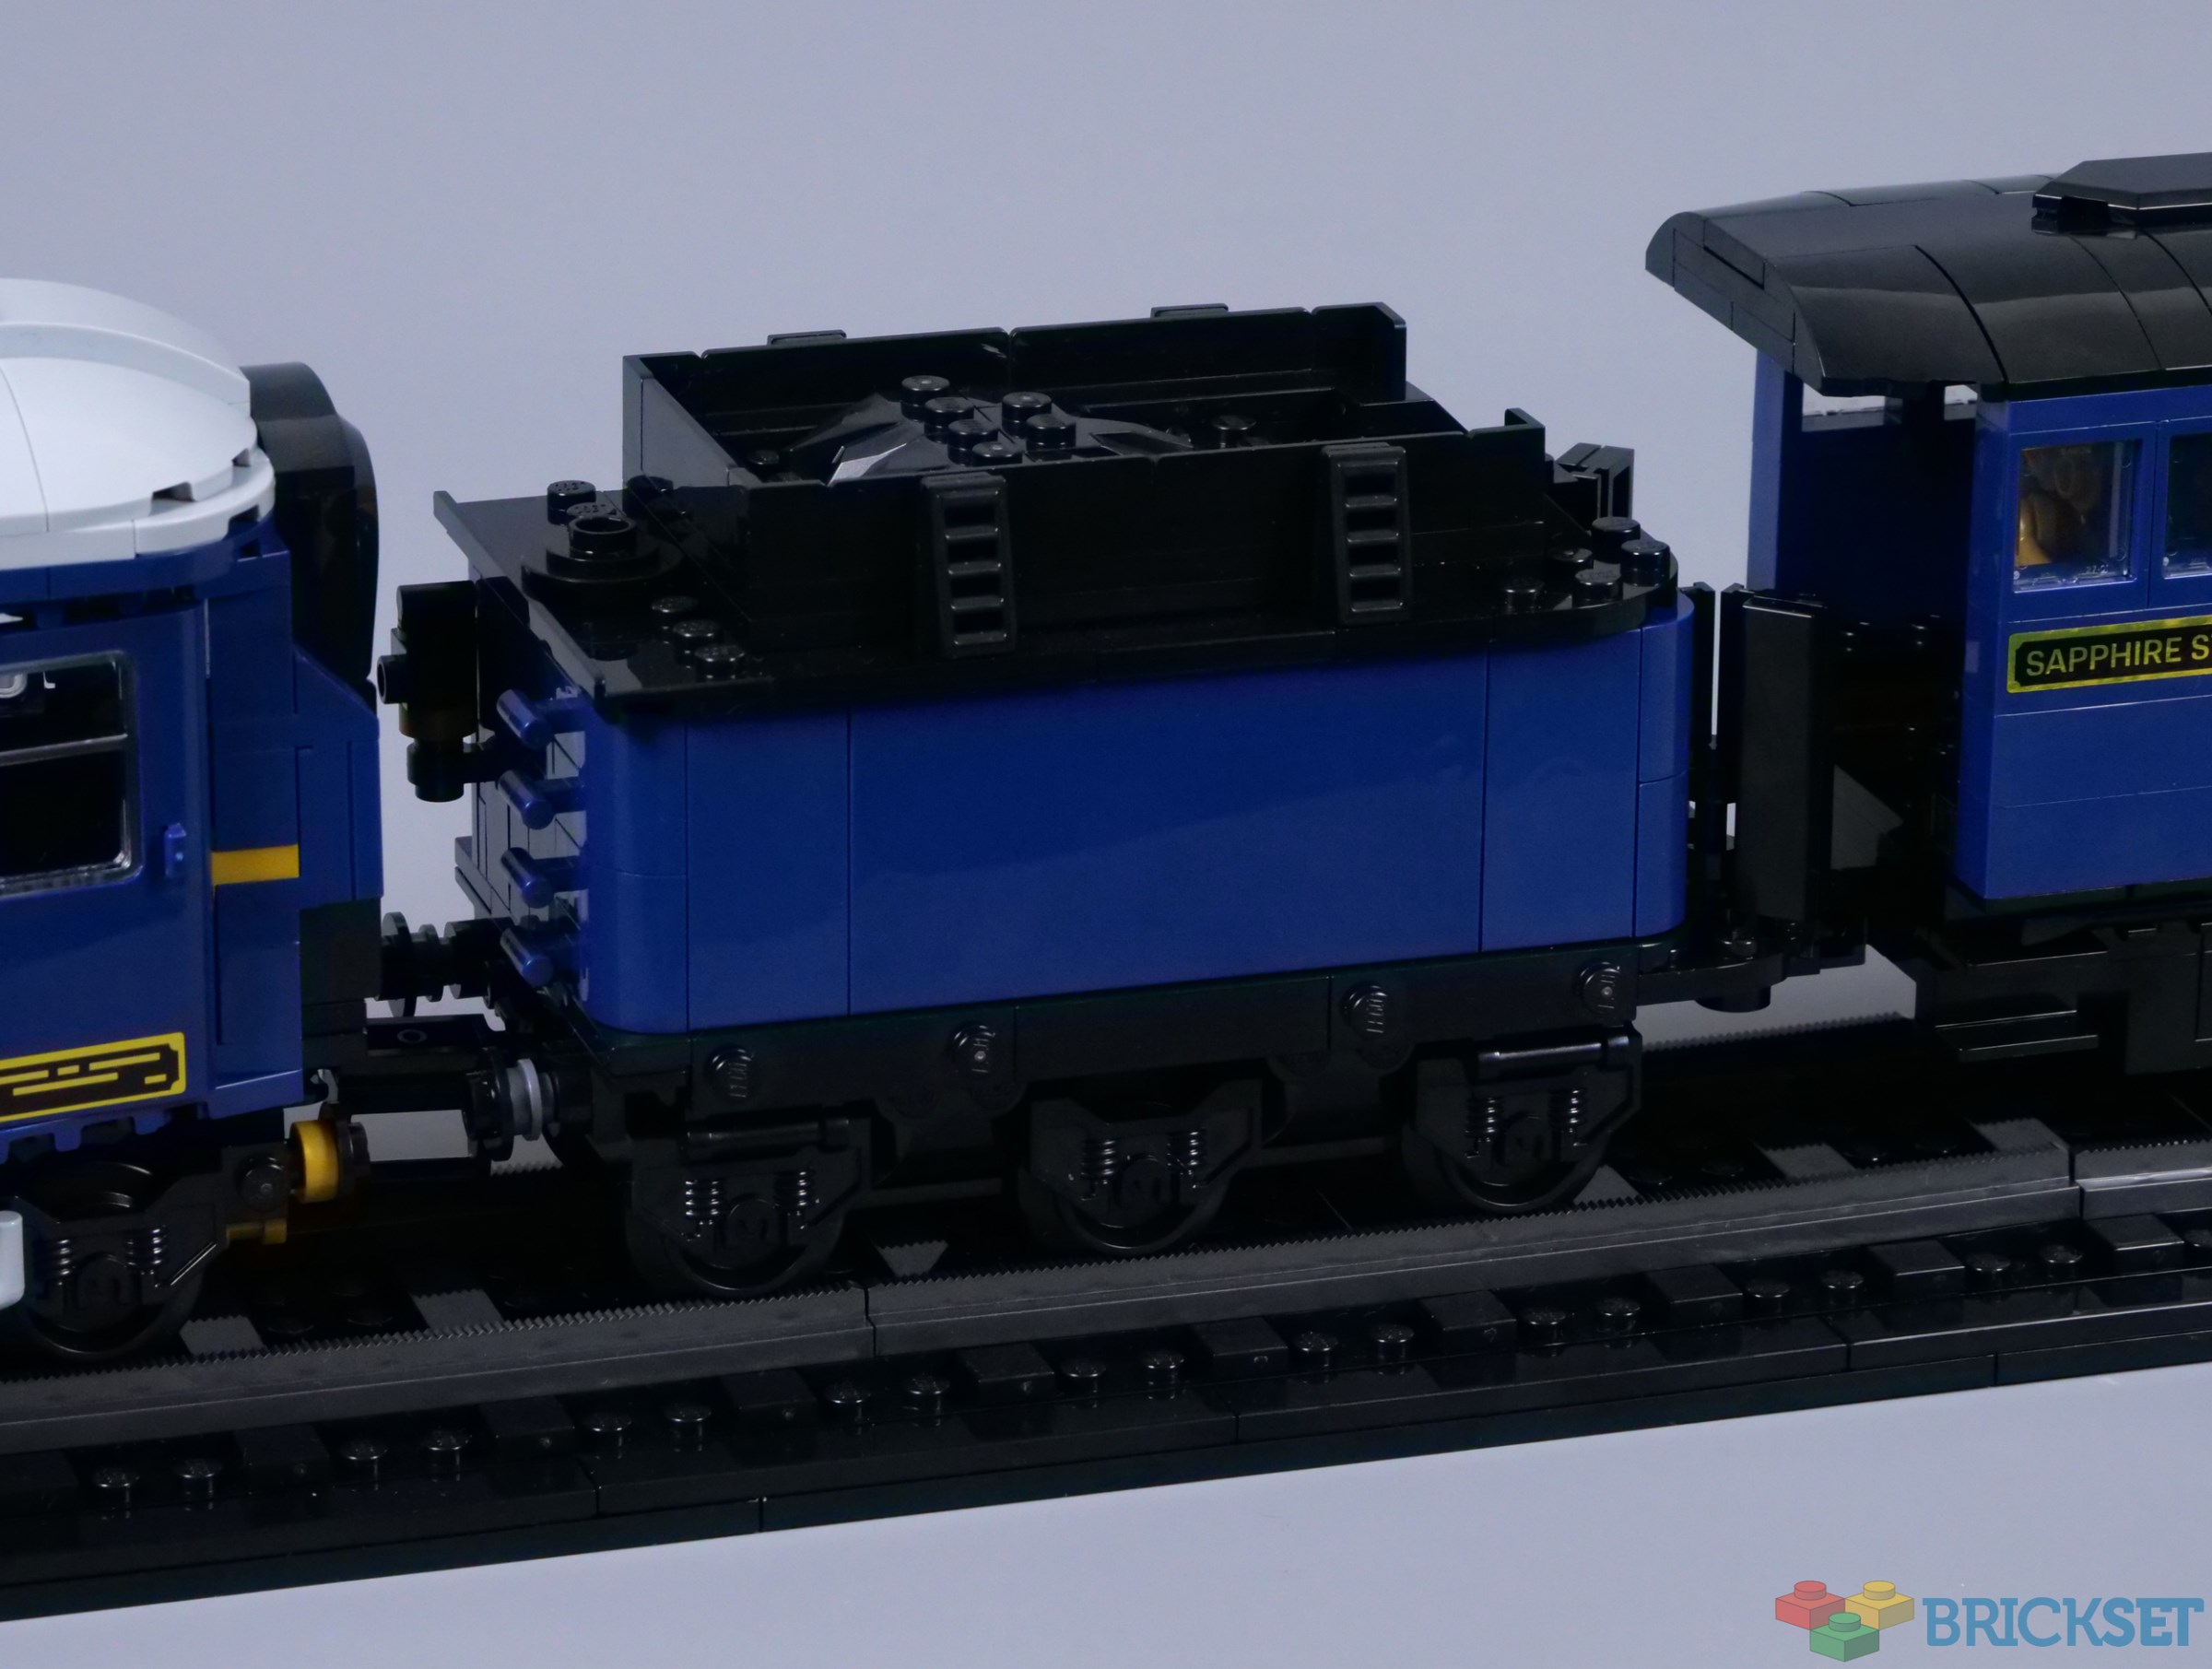 All aboard the new LEGO Orient Express Train set revealed by LEGO - Dexerto